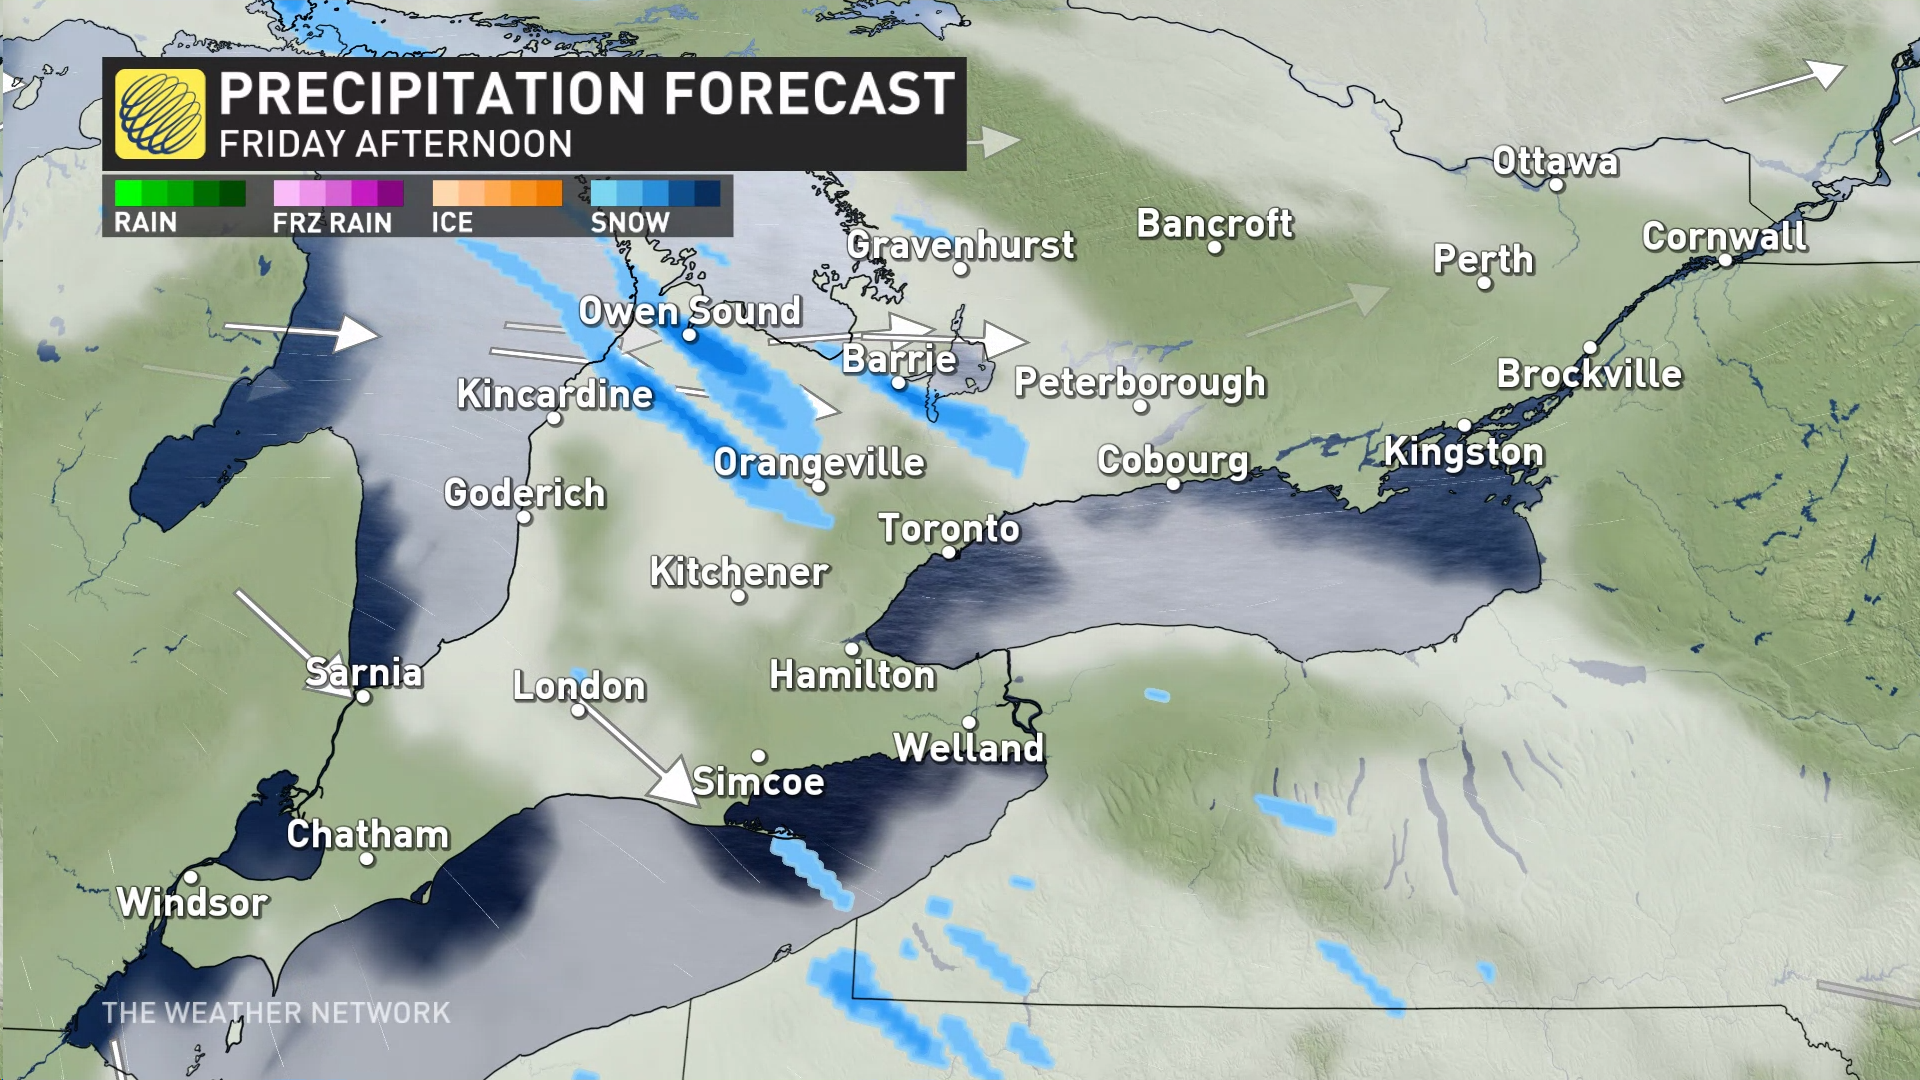 lake-effect snow accompanies coldest daytime highs in southern ontario yet